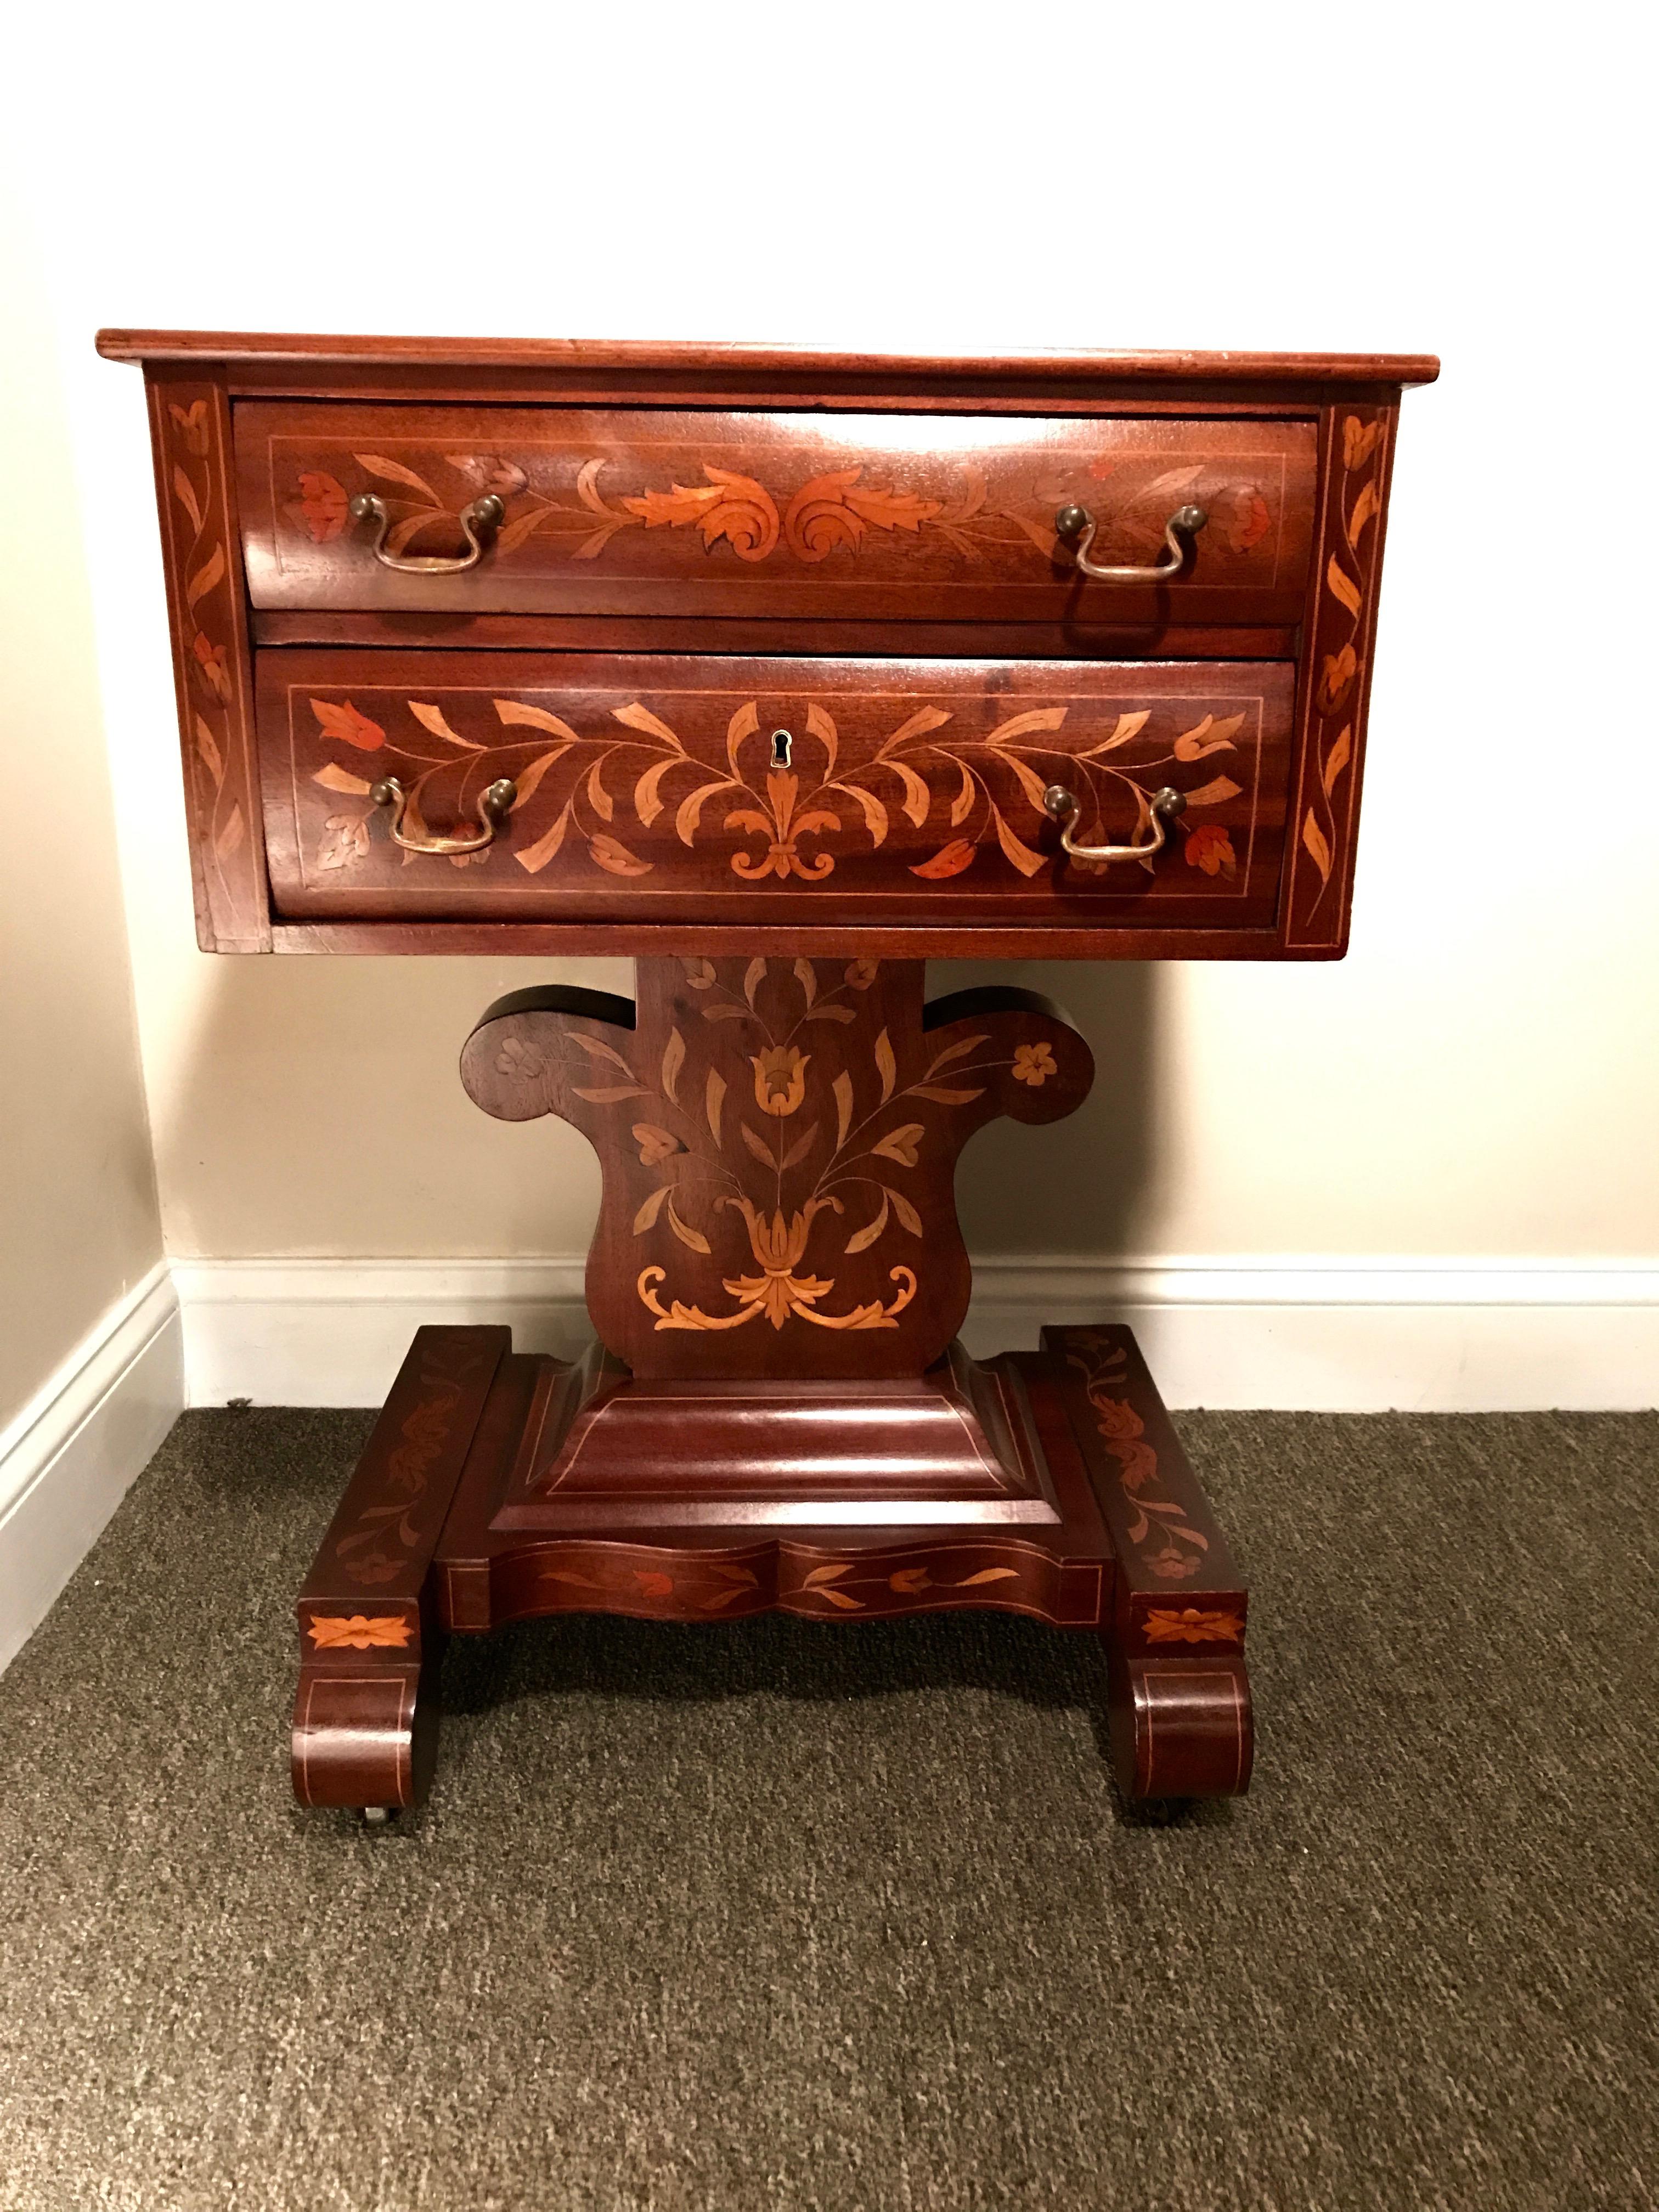 Dutch Empire Marquetry Stand in Mahogany and Fruitwood, circa 1840 For Sale 4